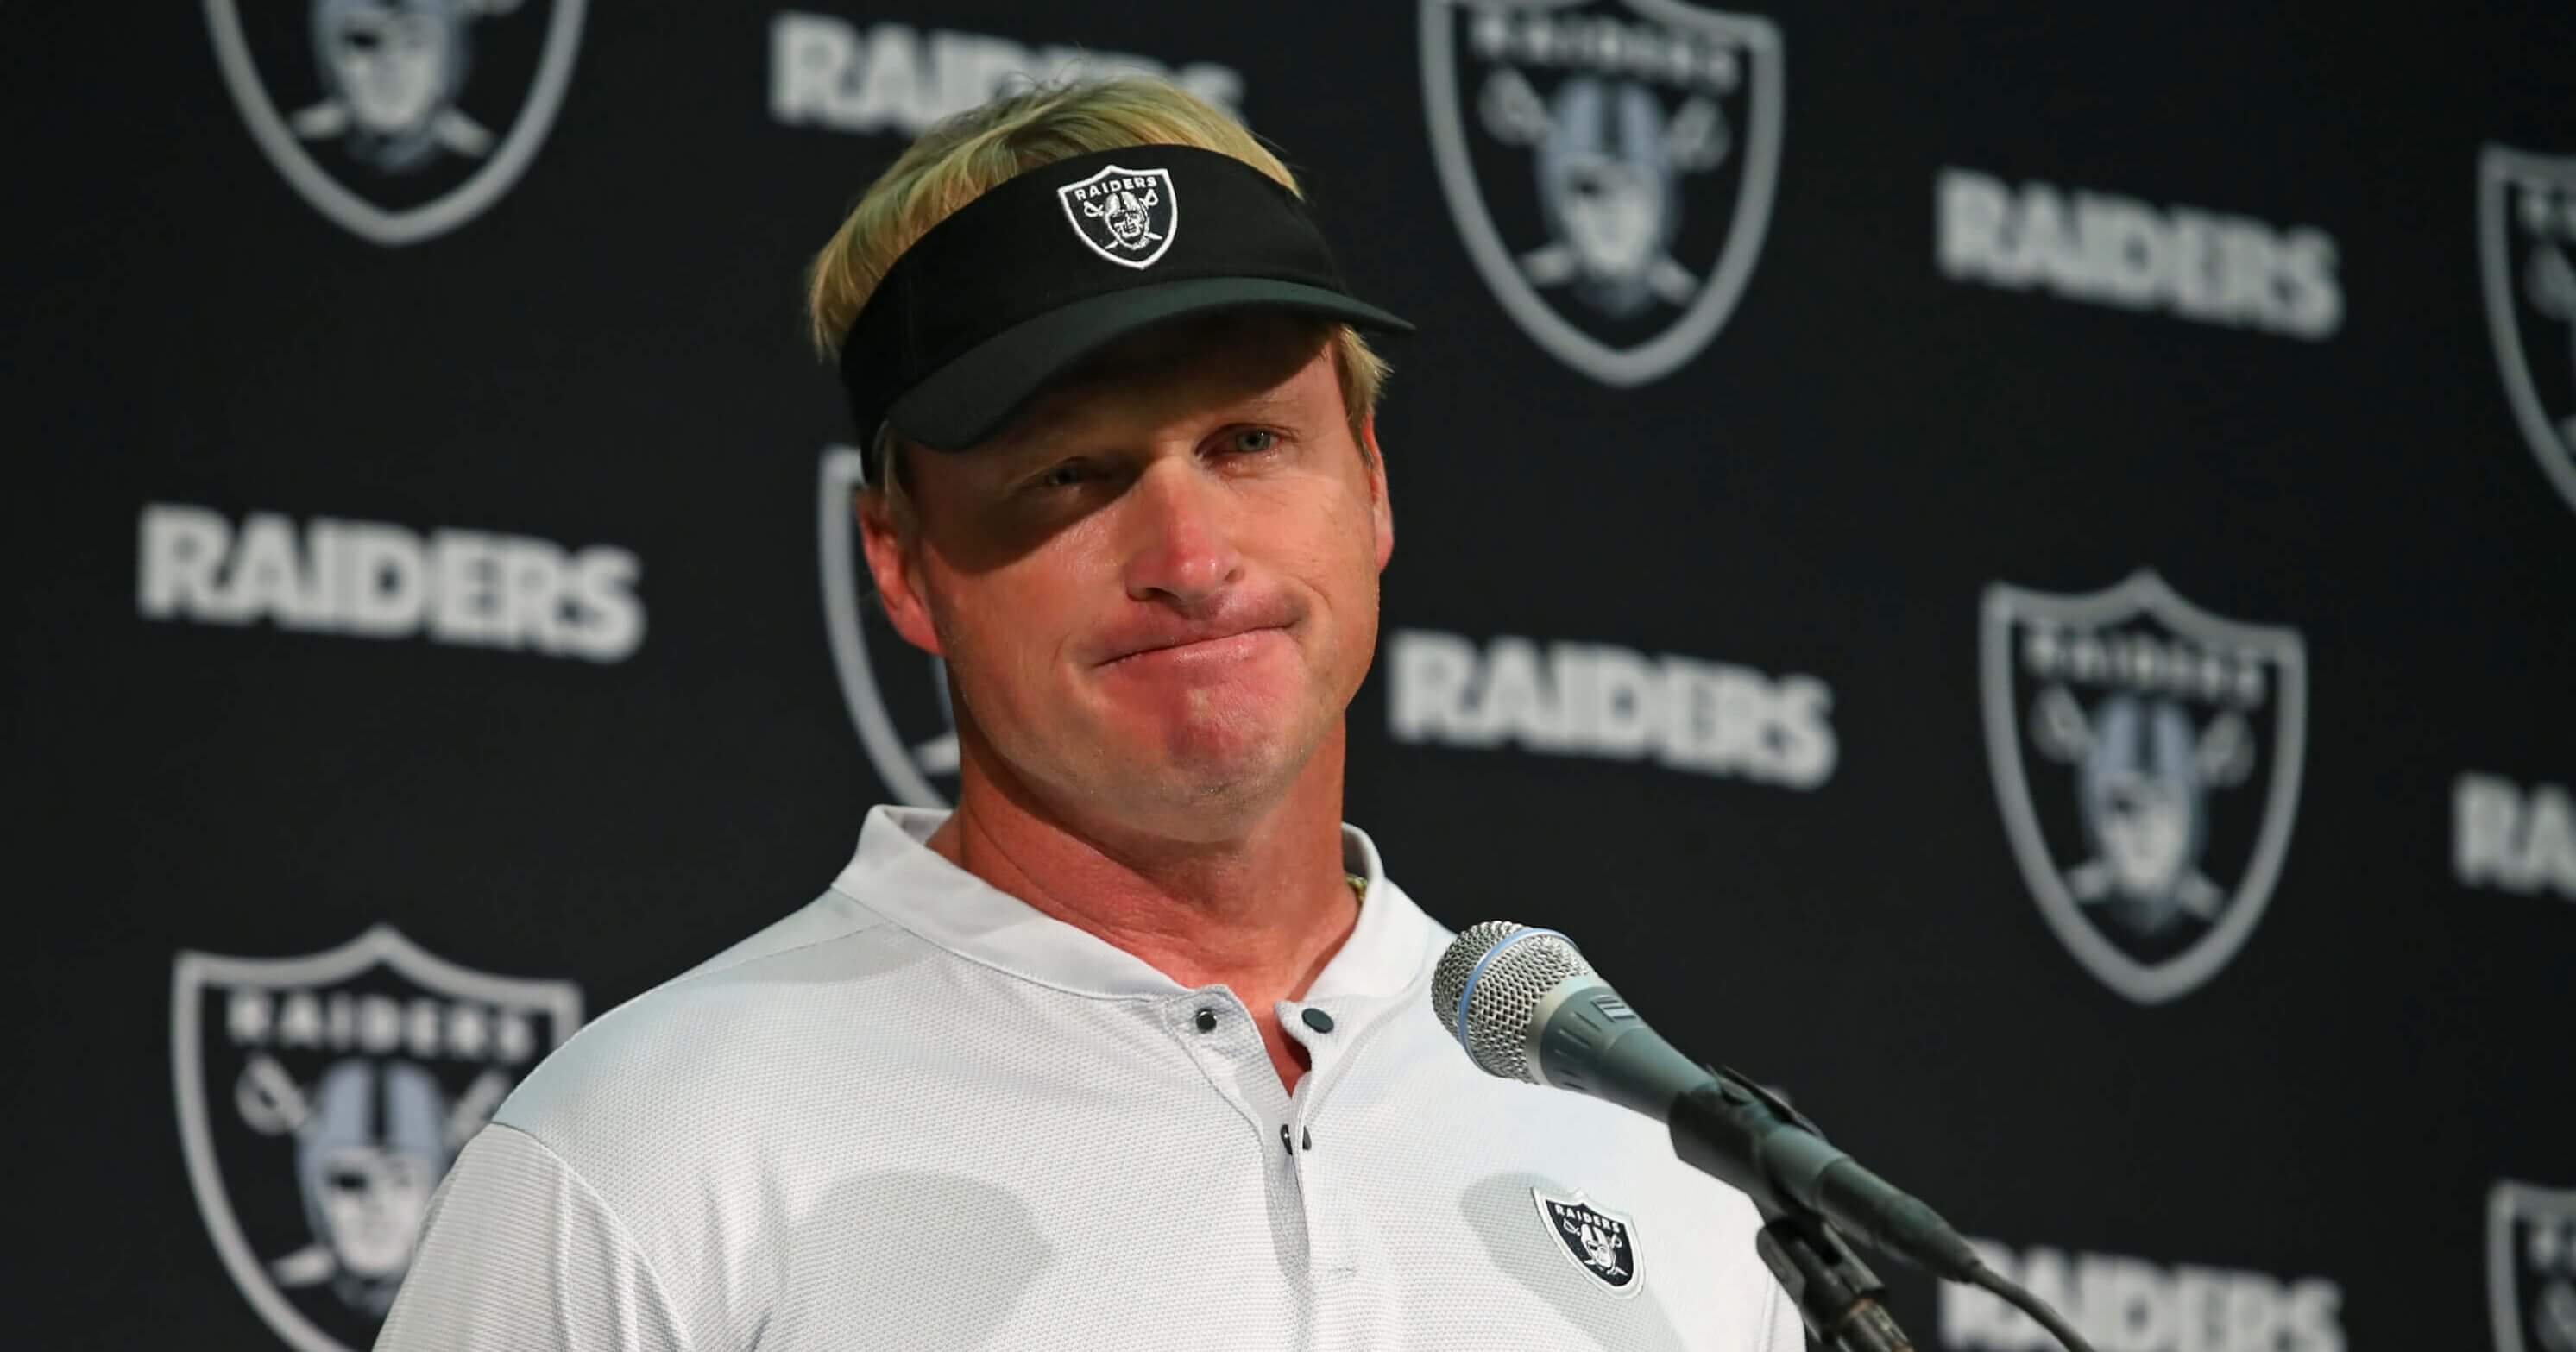 Oakland Raiders head coach Jon Gruden answers questions during a news conference after his team's season-opening loss to the Los Angeles Rams on Monday.